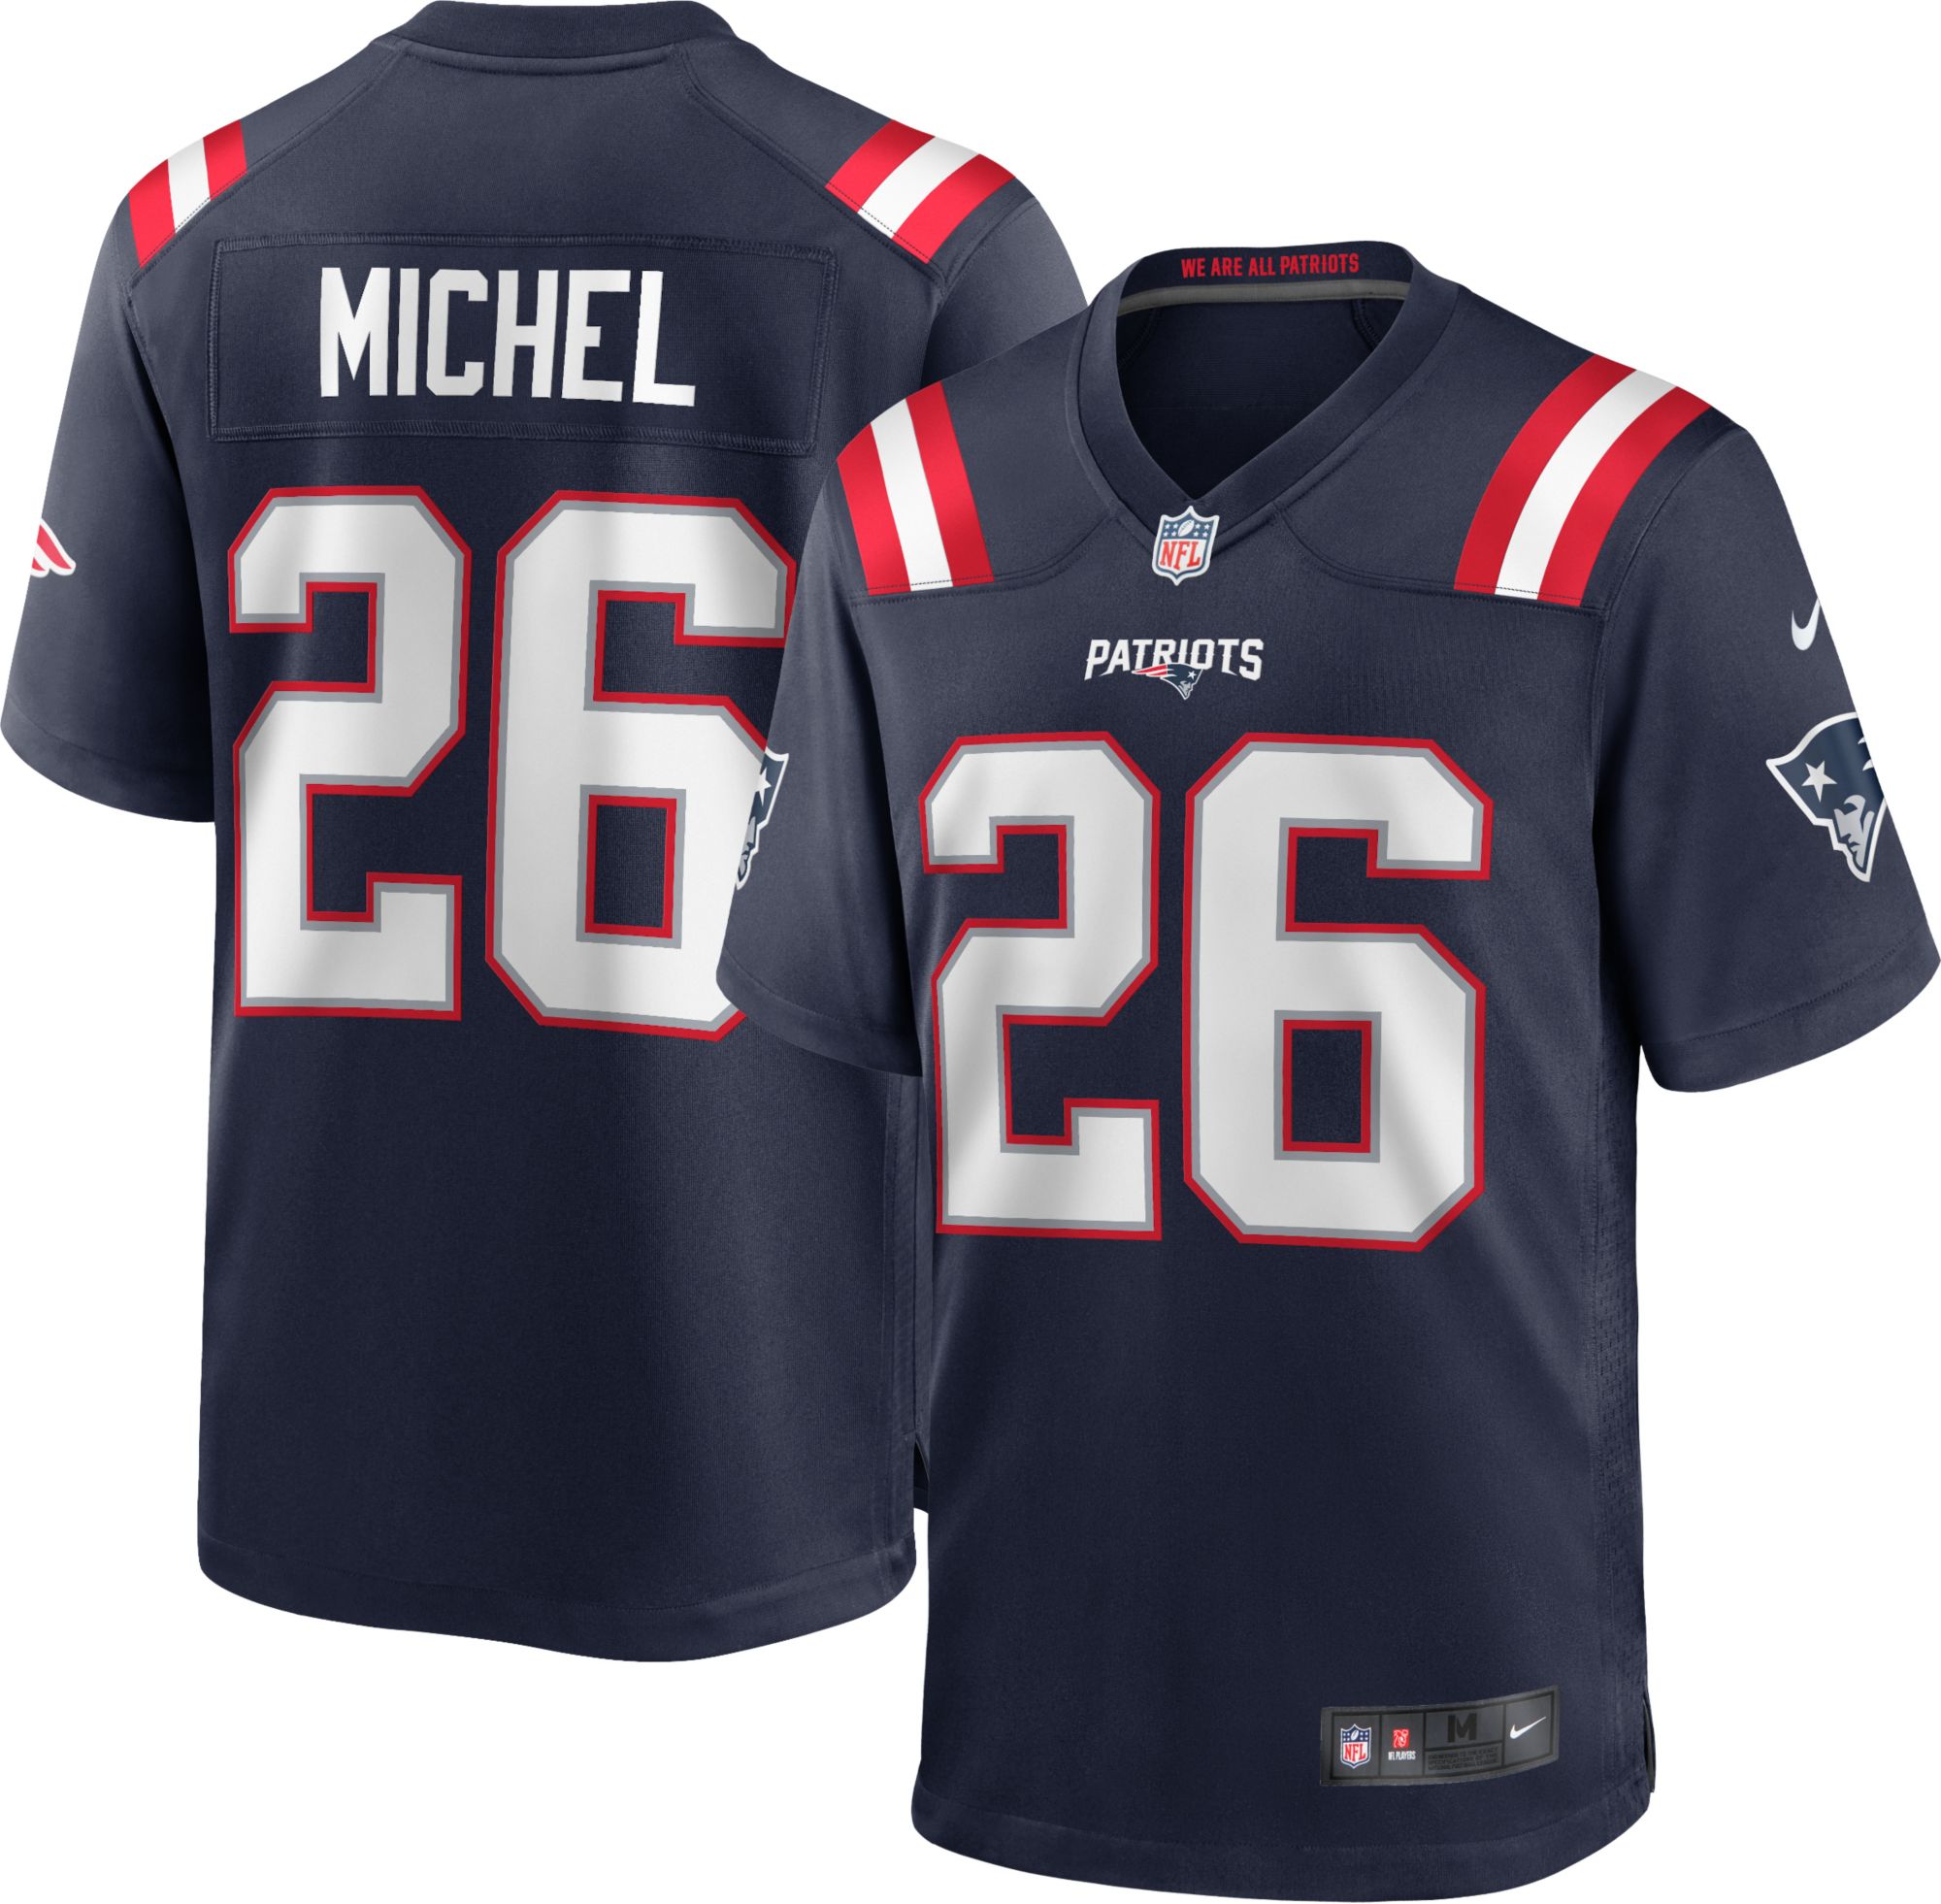 Sony Michel #26 Home Navy Game Jersey 